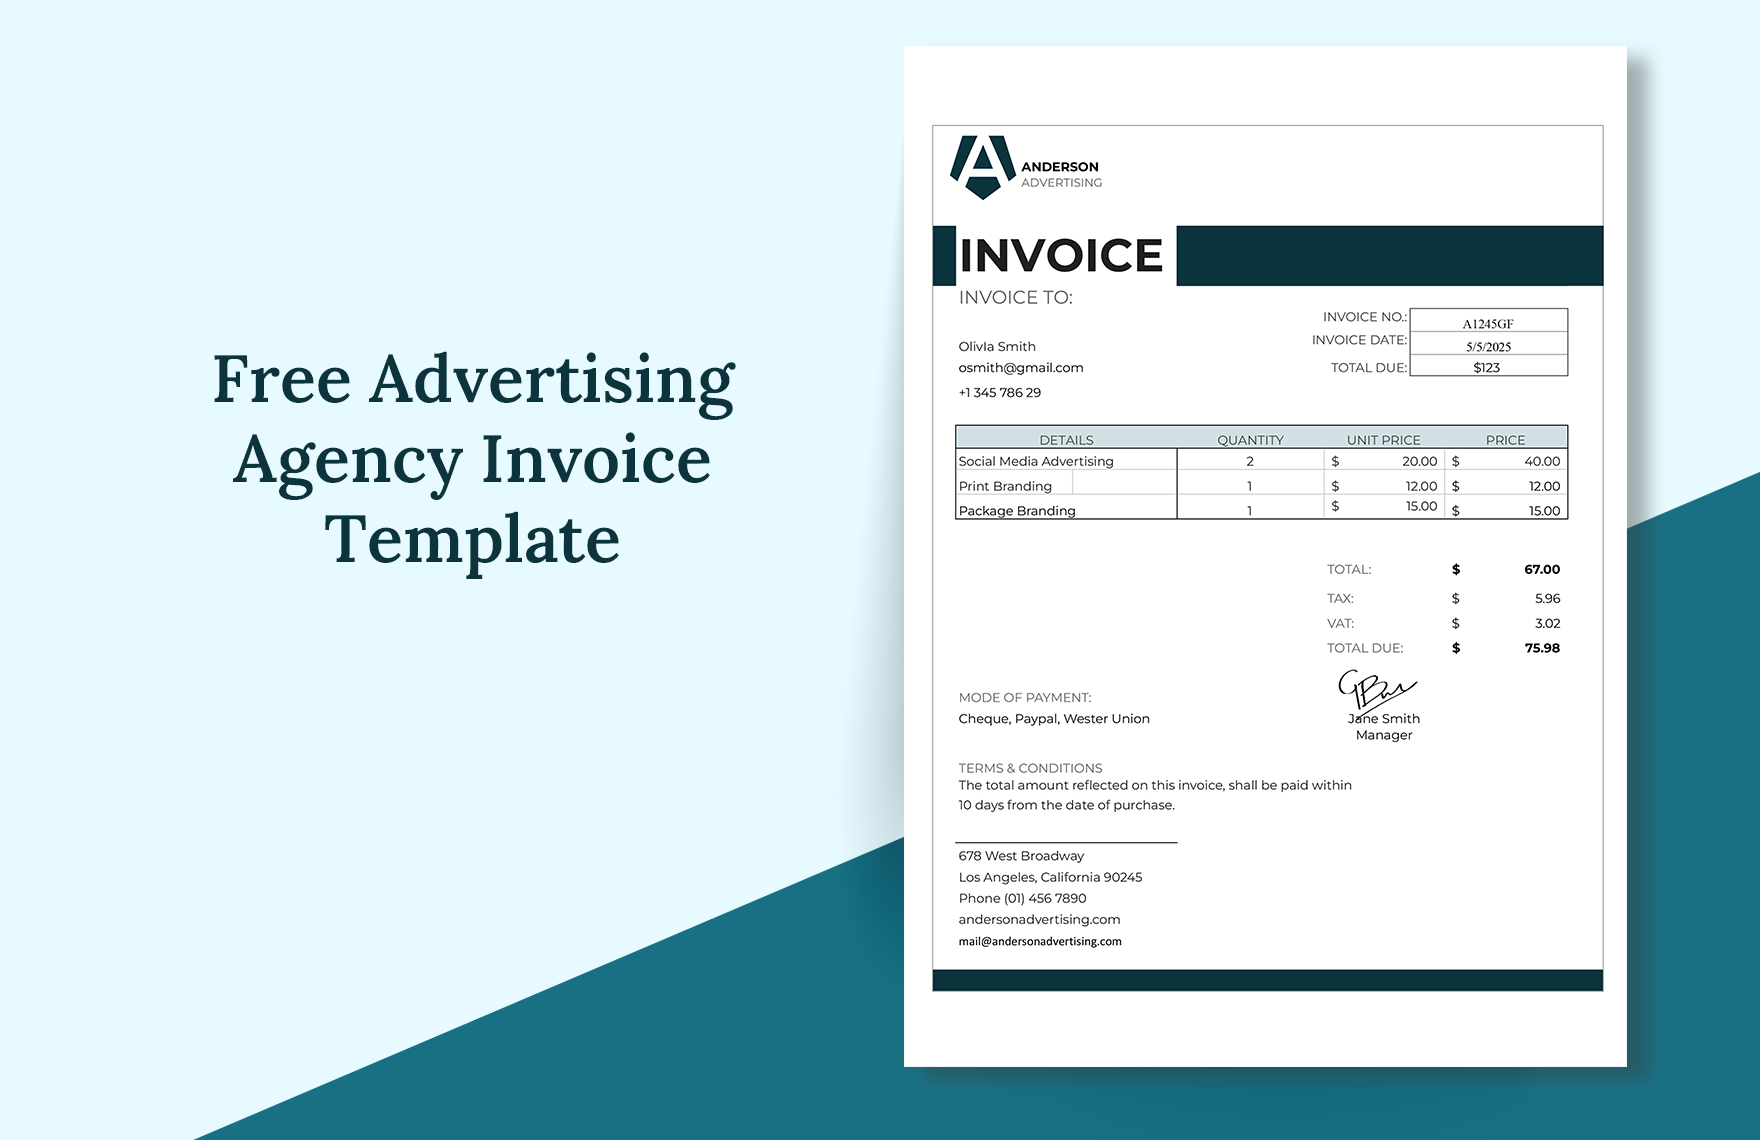 Advertising Invoice Excel Templates Spreadsheet, Free, Download